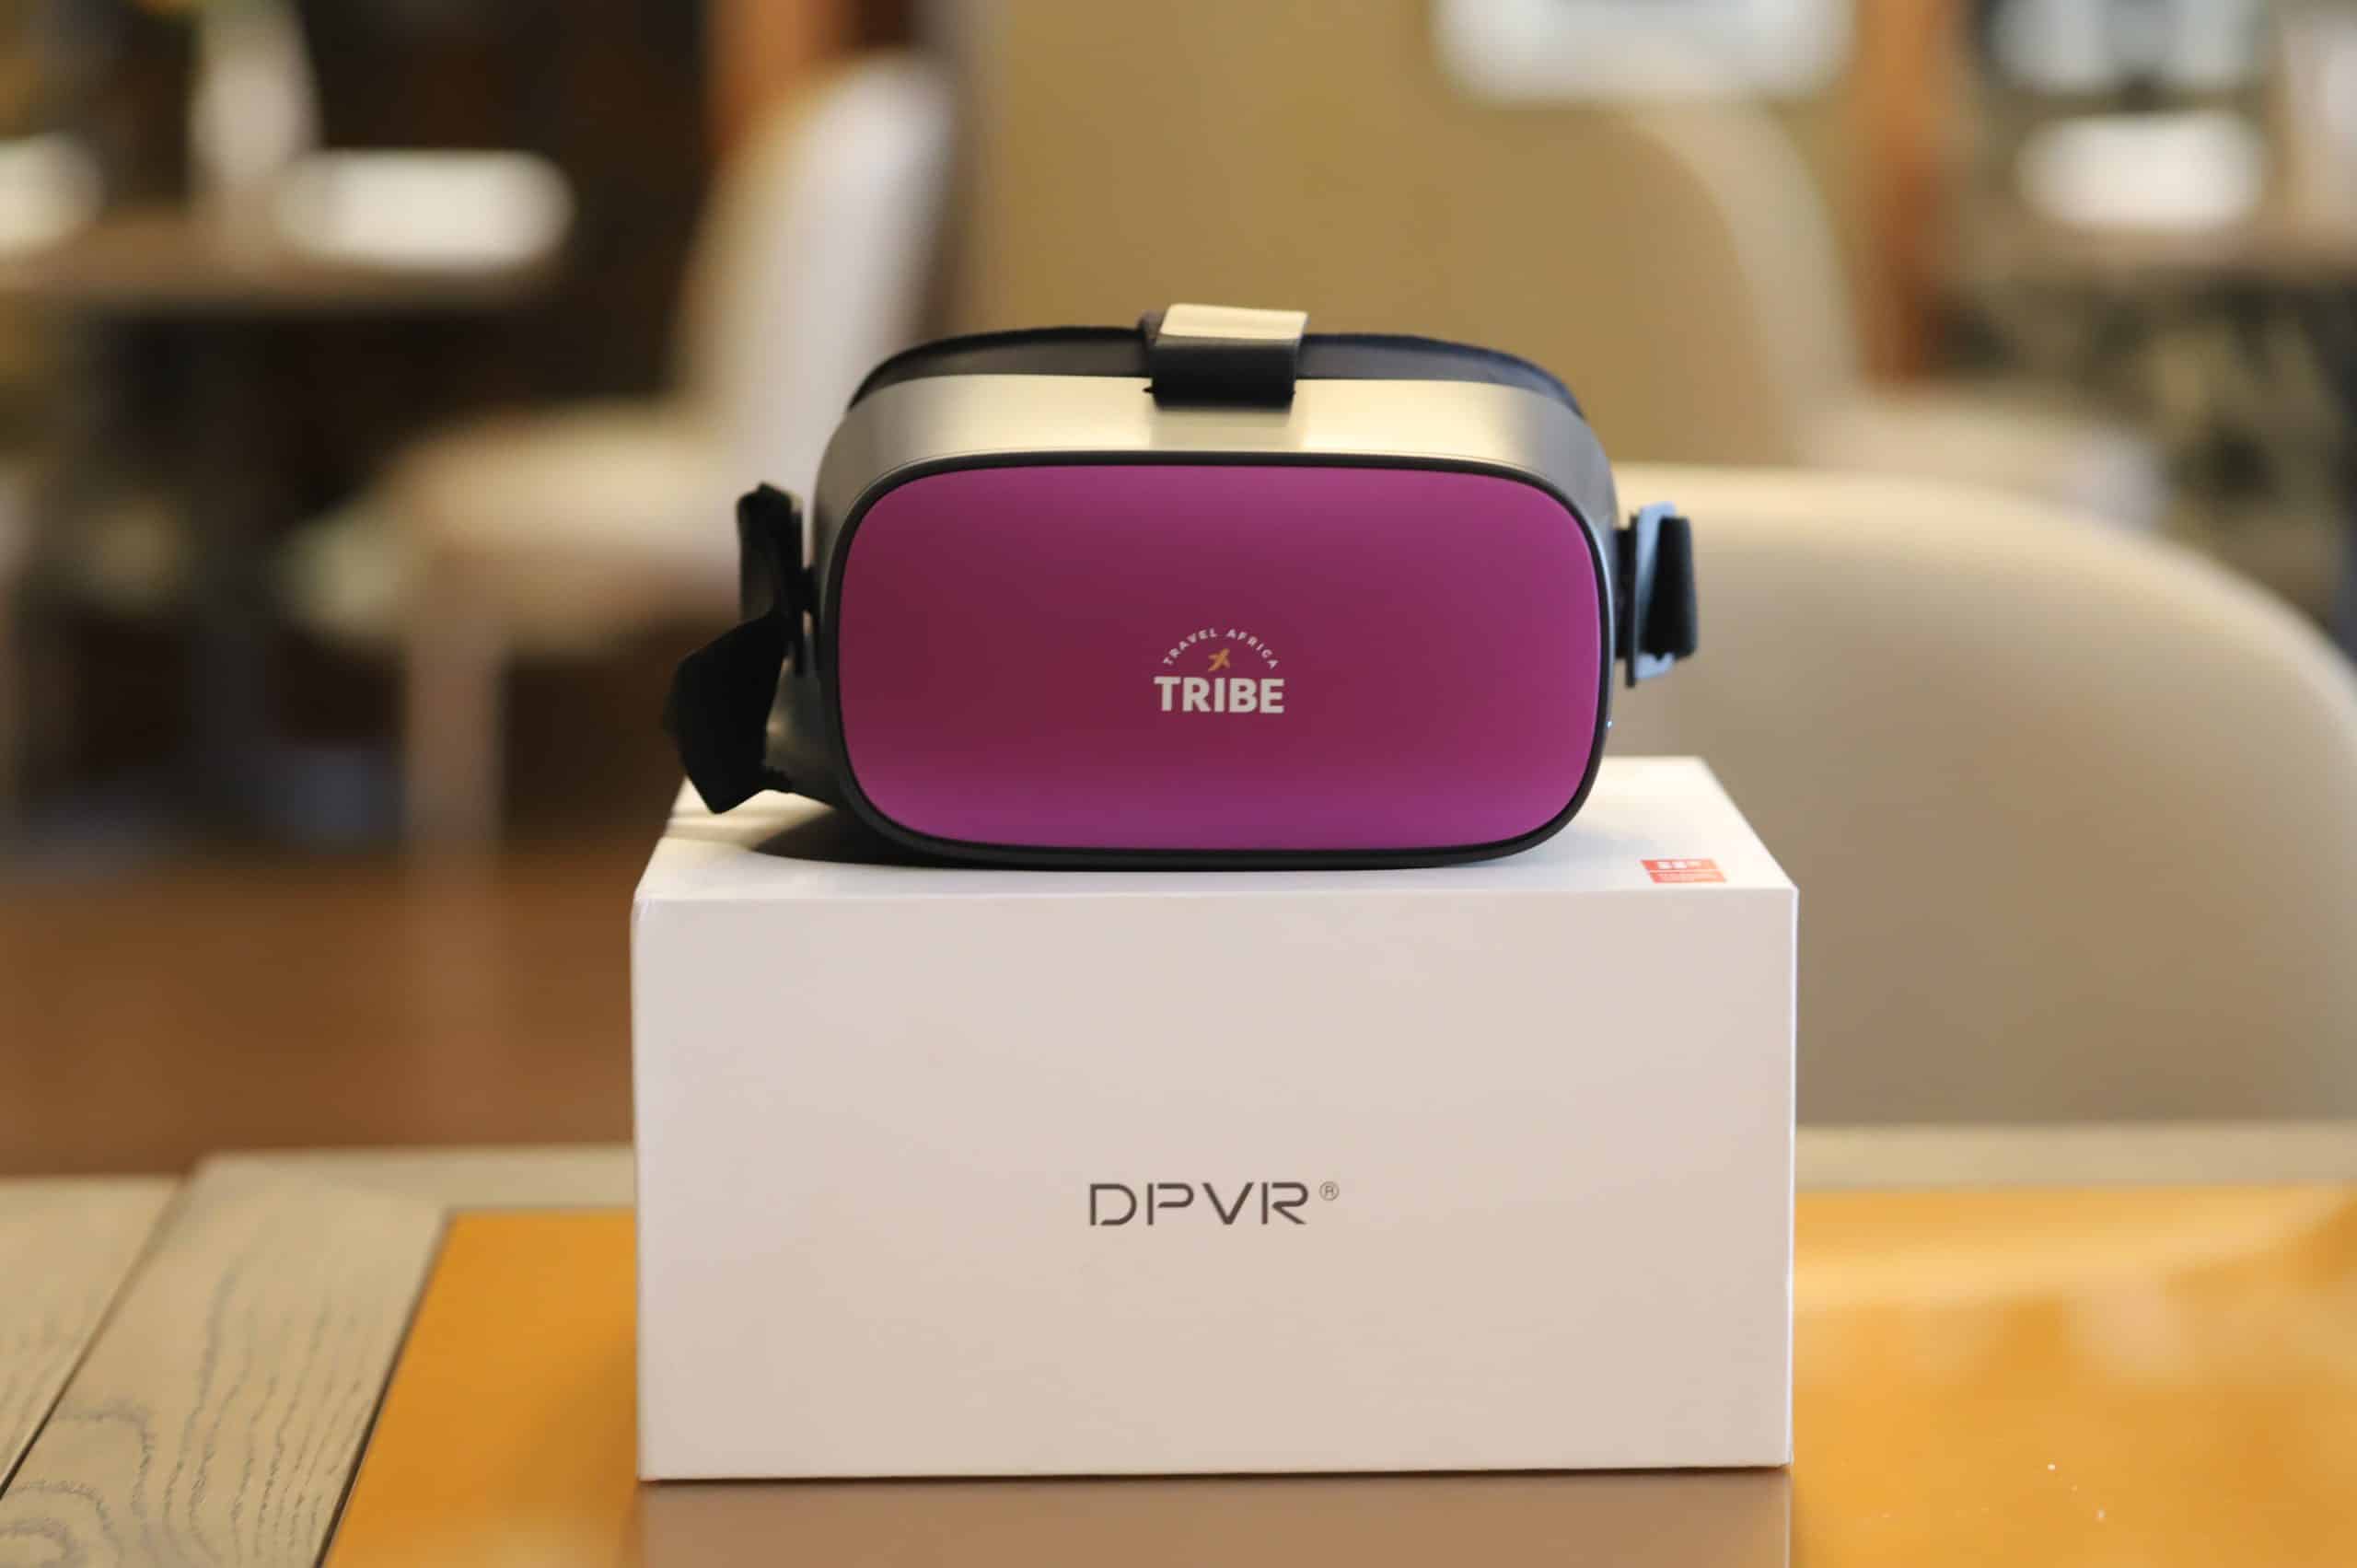 DPVR-virtual-reality-portable-wireless-headset-for-viewing-Travel-Africa-Network-VR-content-in-4K